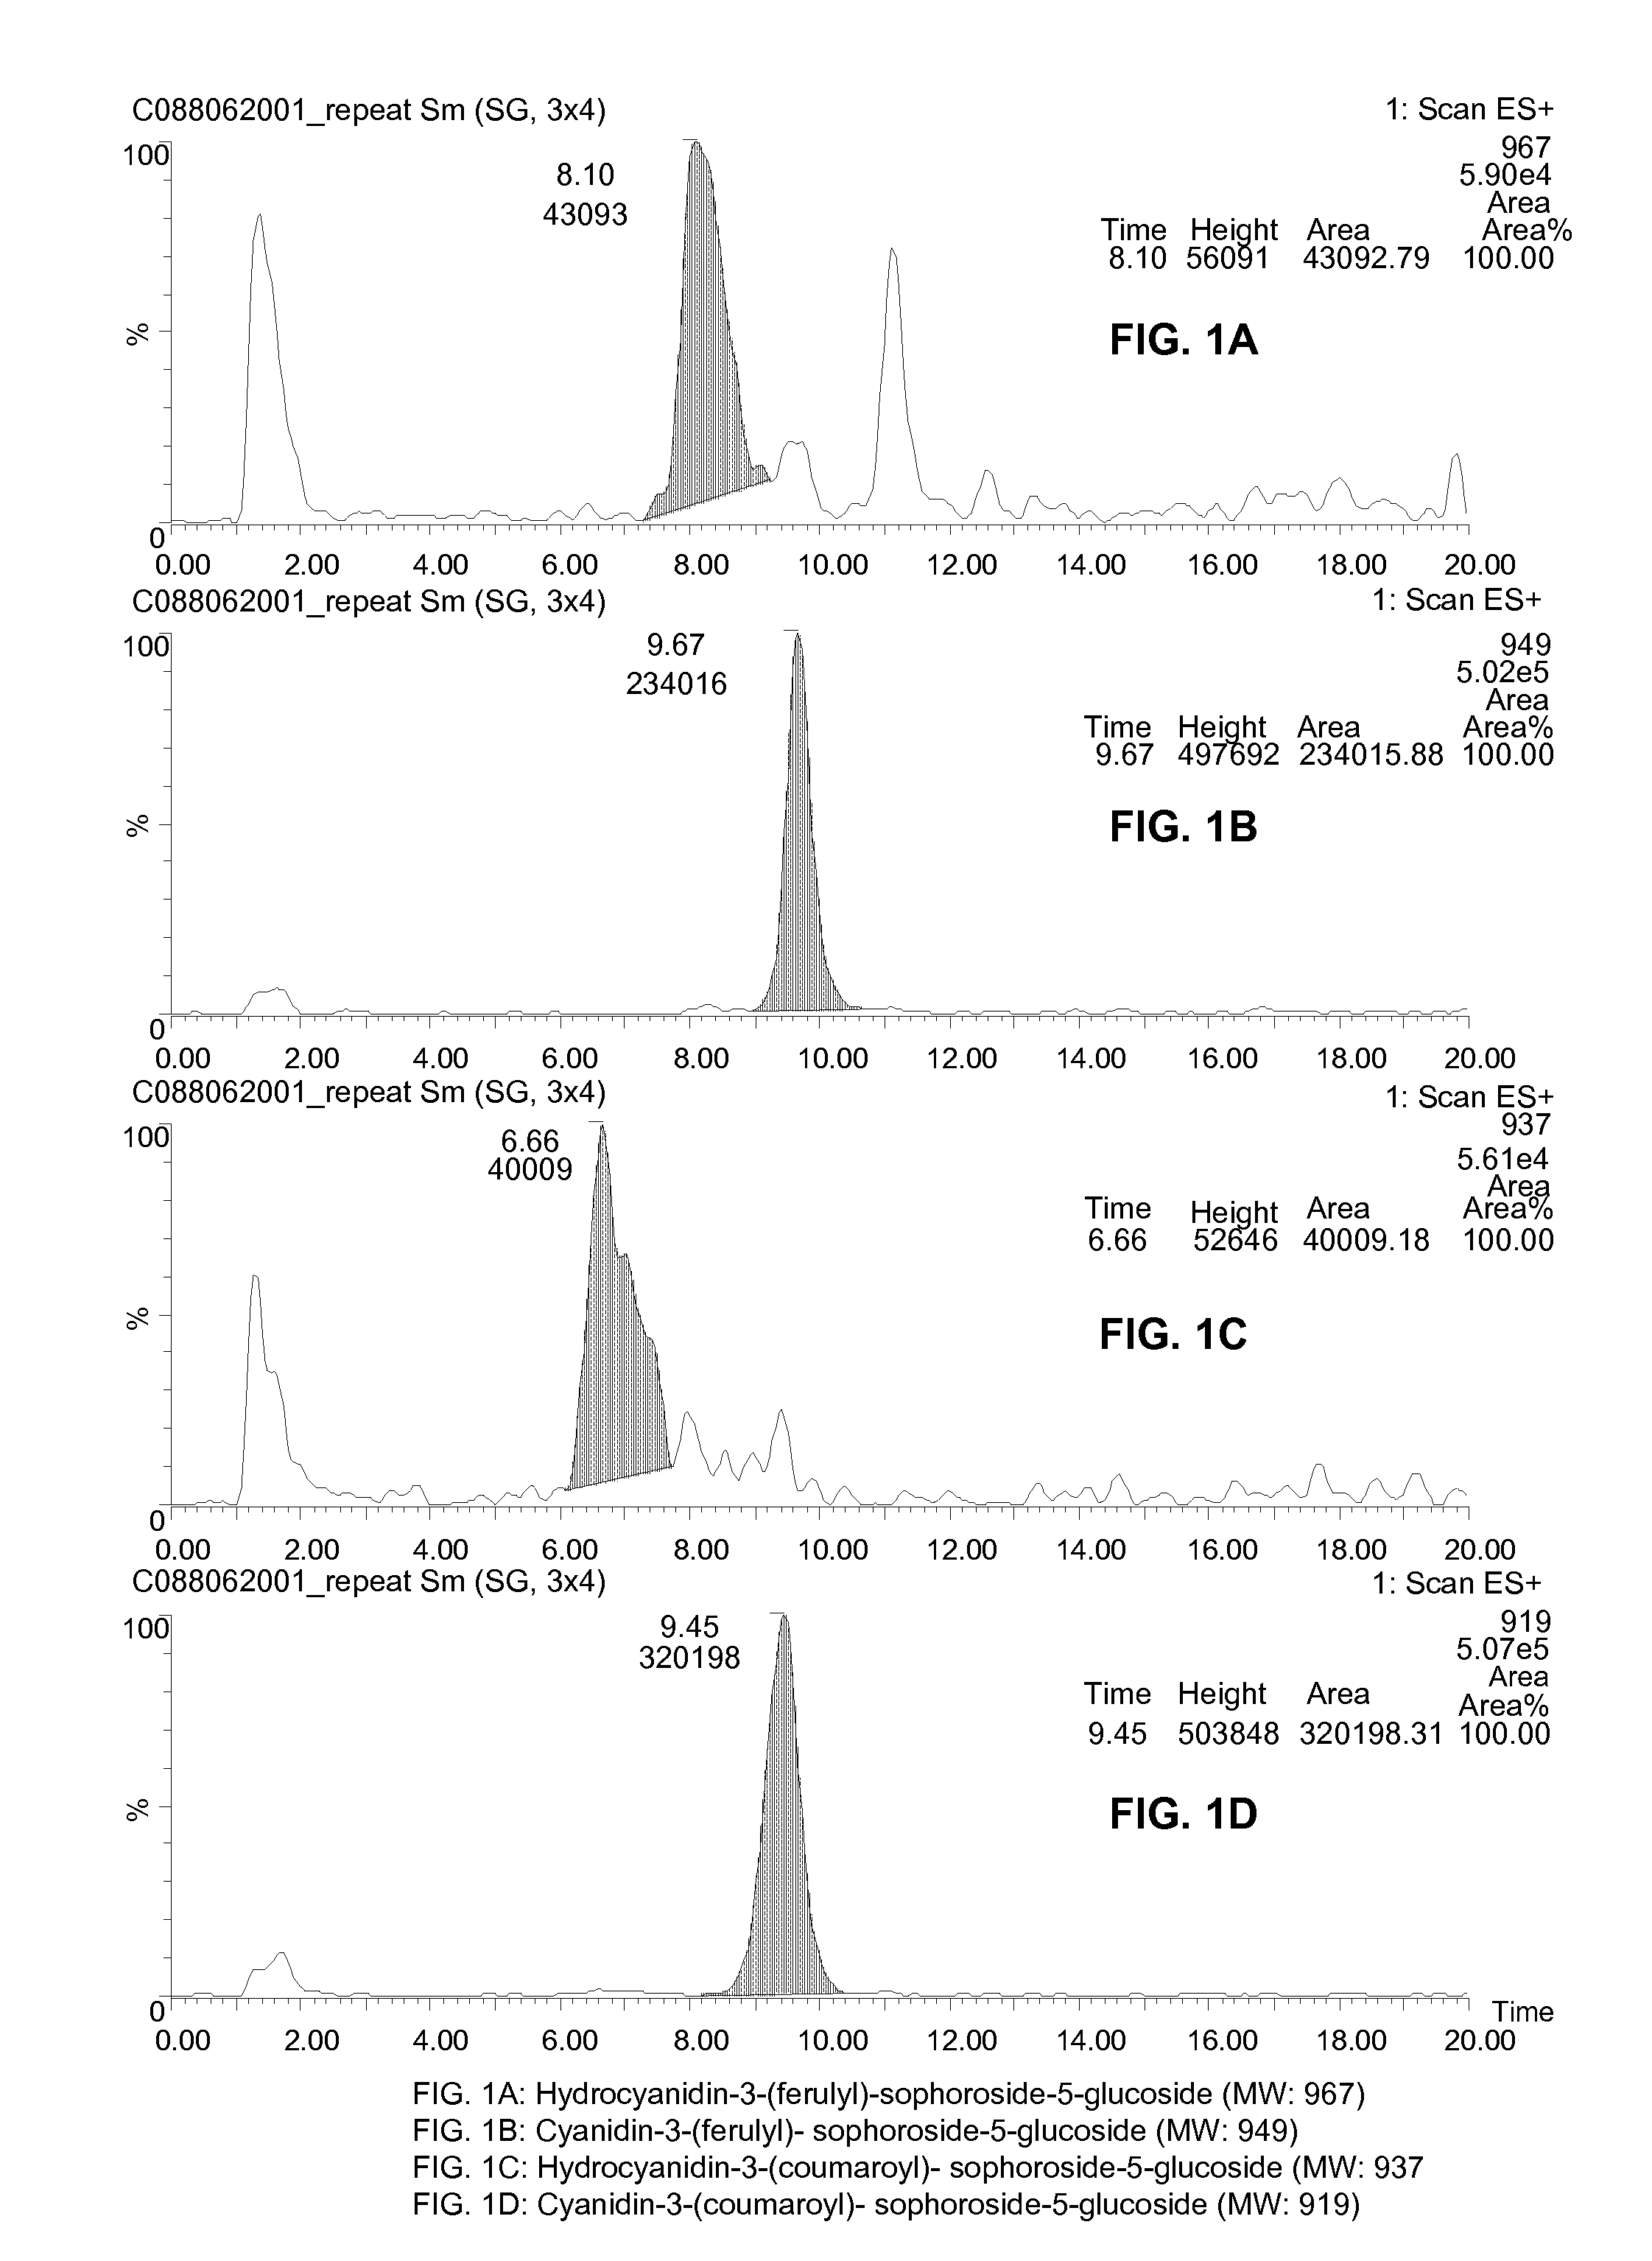 Methods for Creating Color Variation in Anthocyanins Produced by Cell Culture